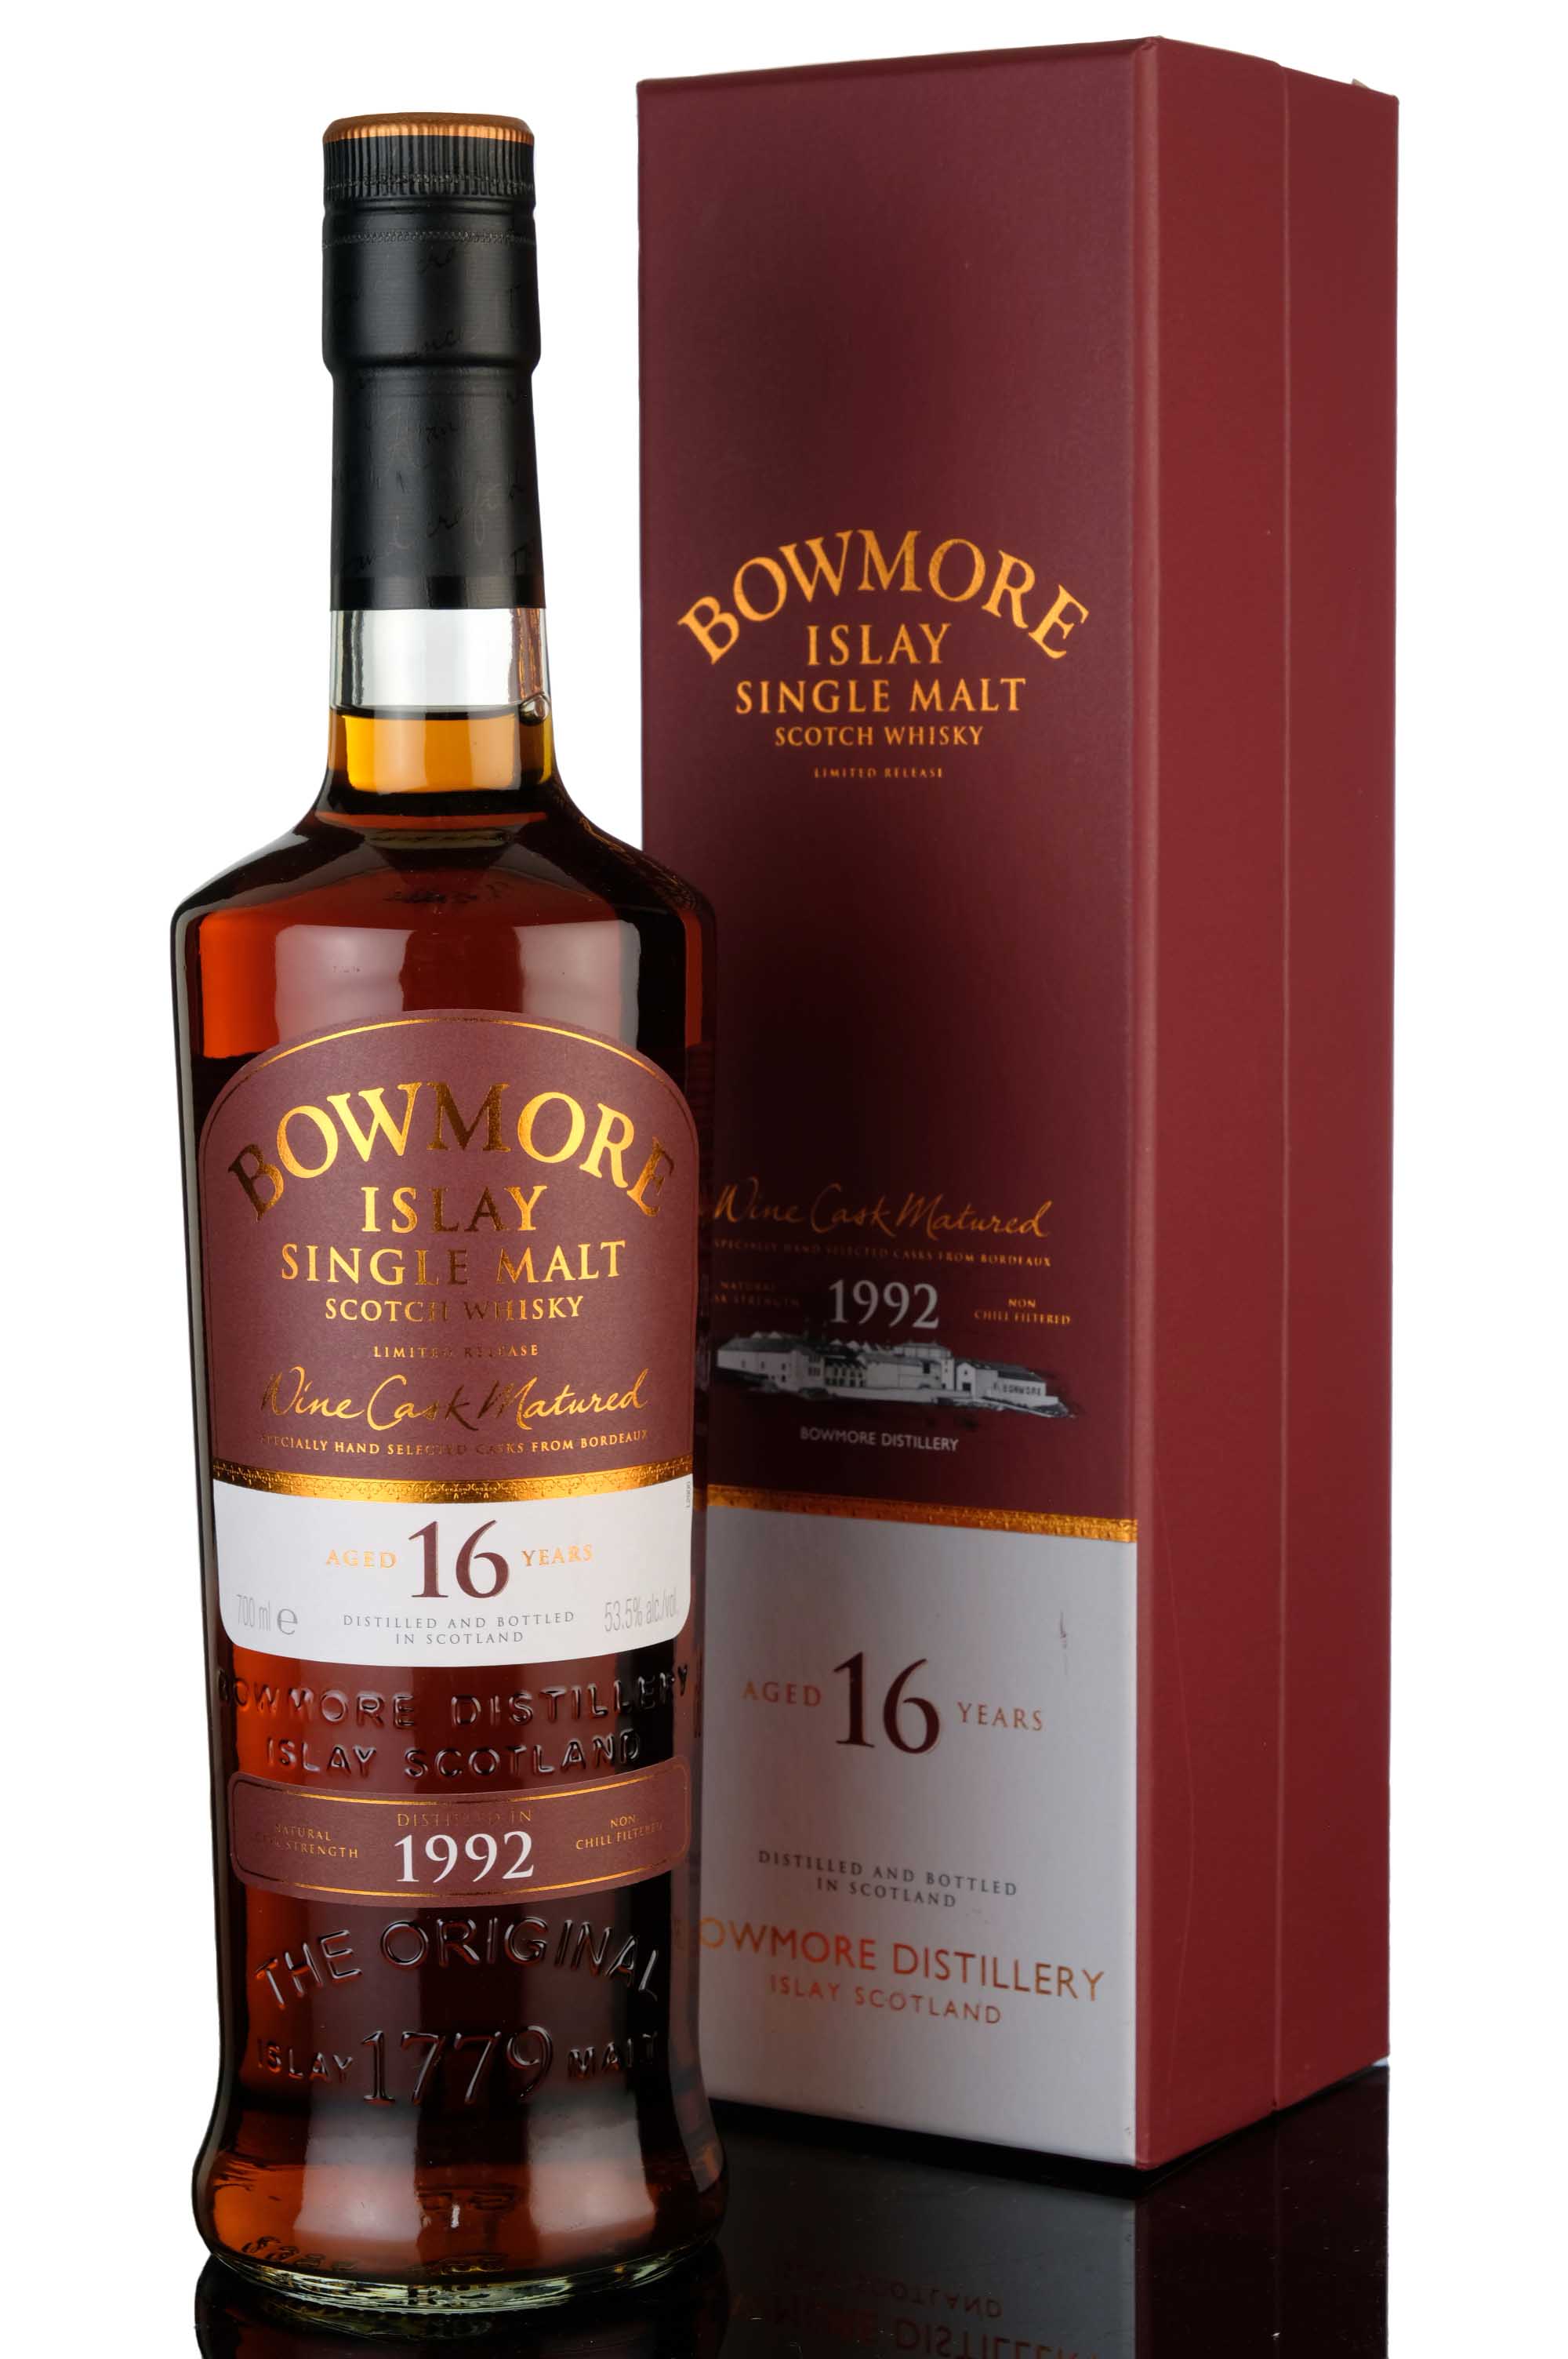 Bowmore 1992 - 16 Year Old - Wine Cask Matured